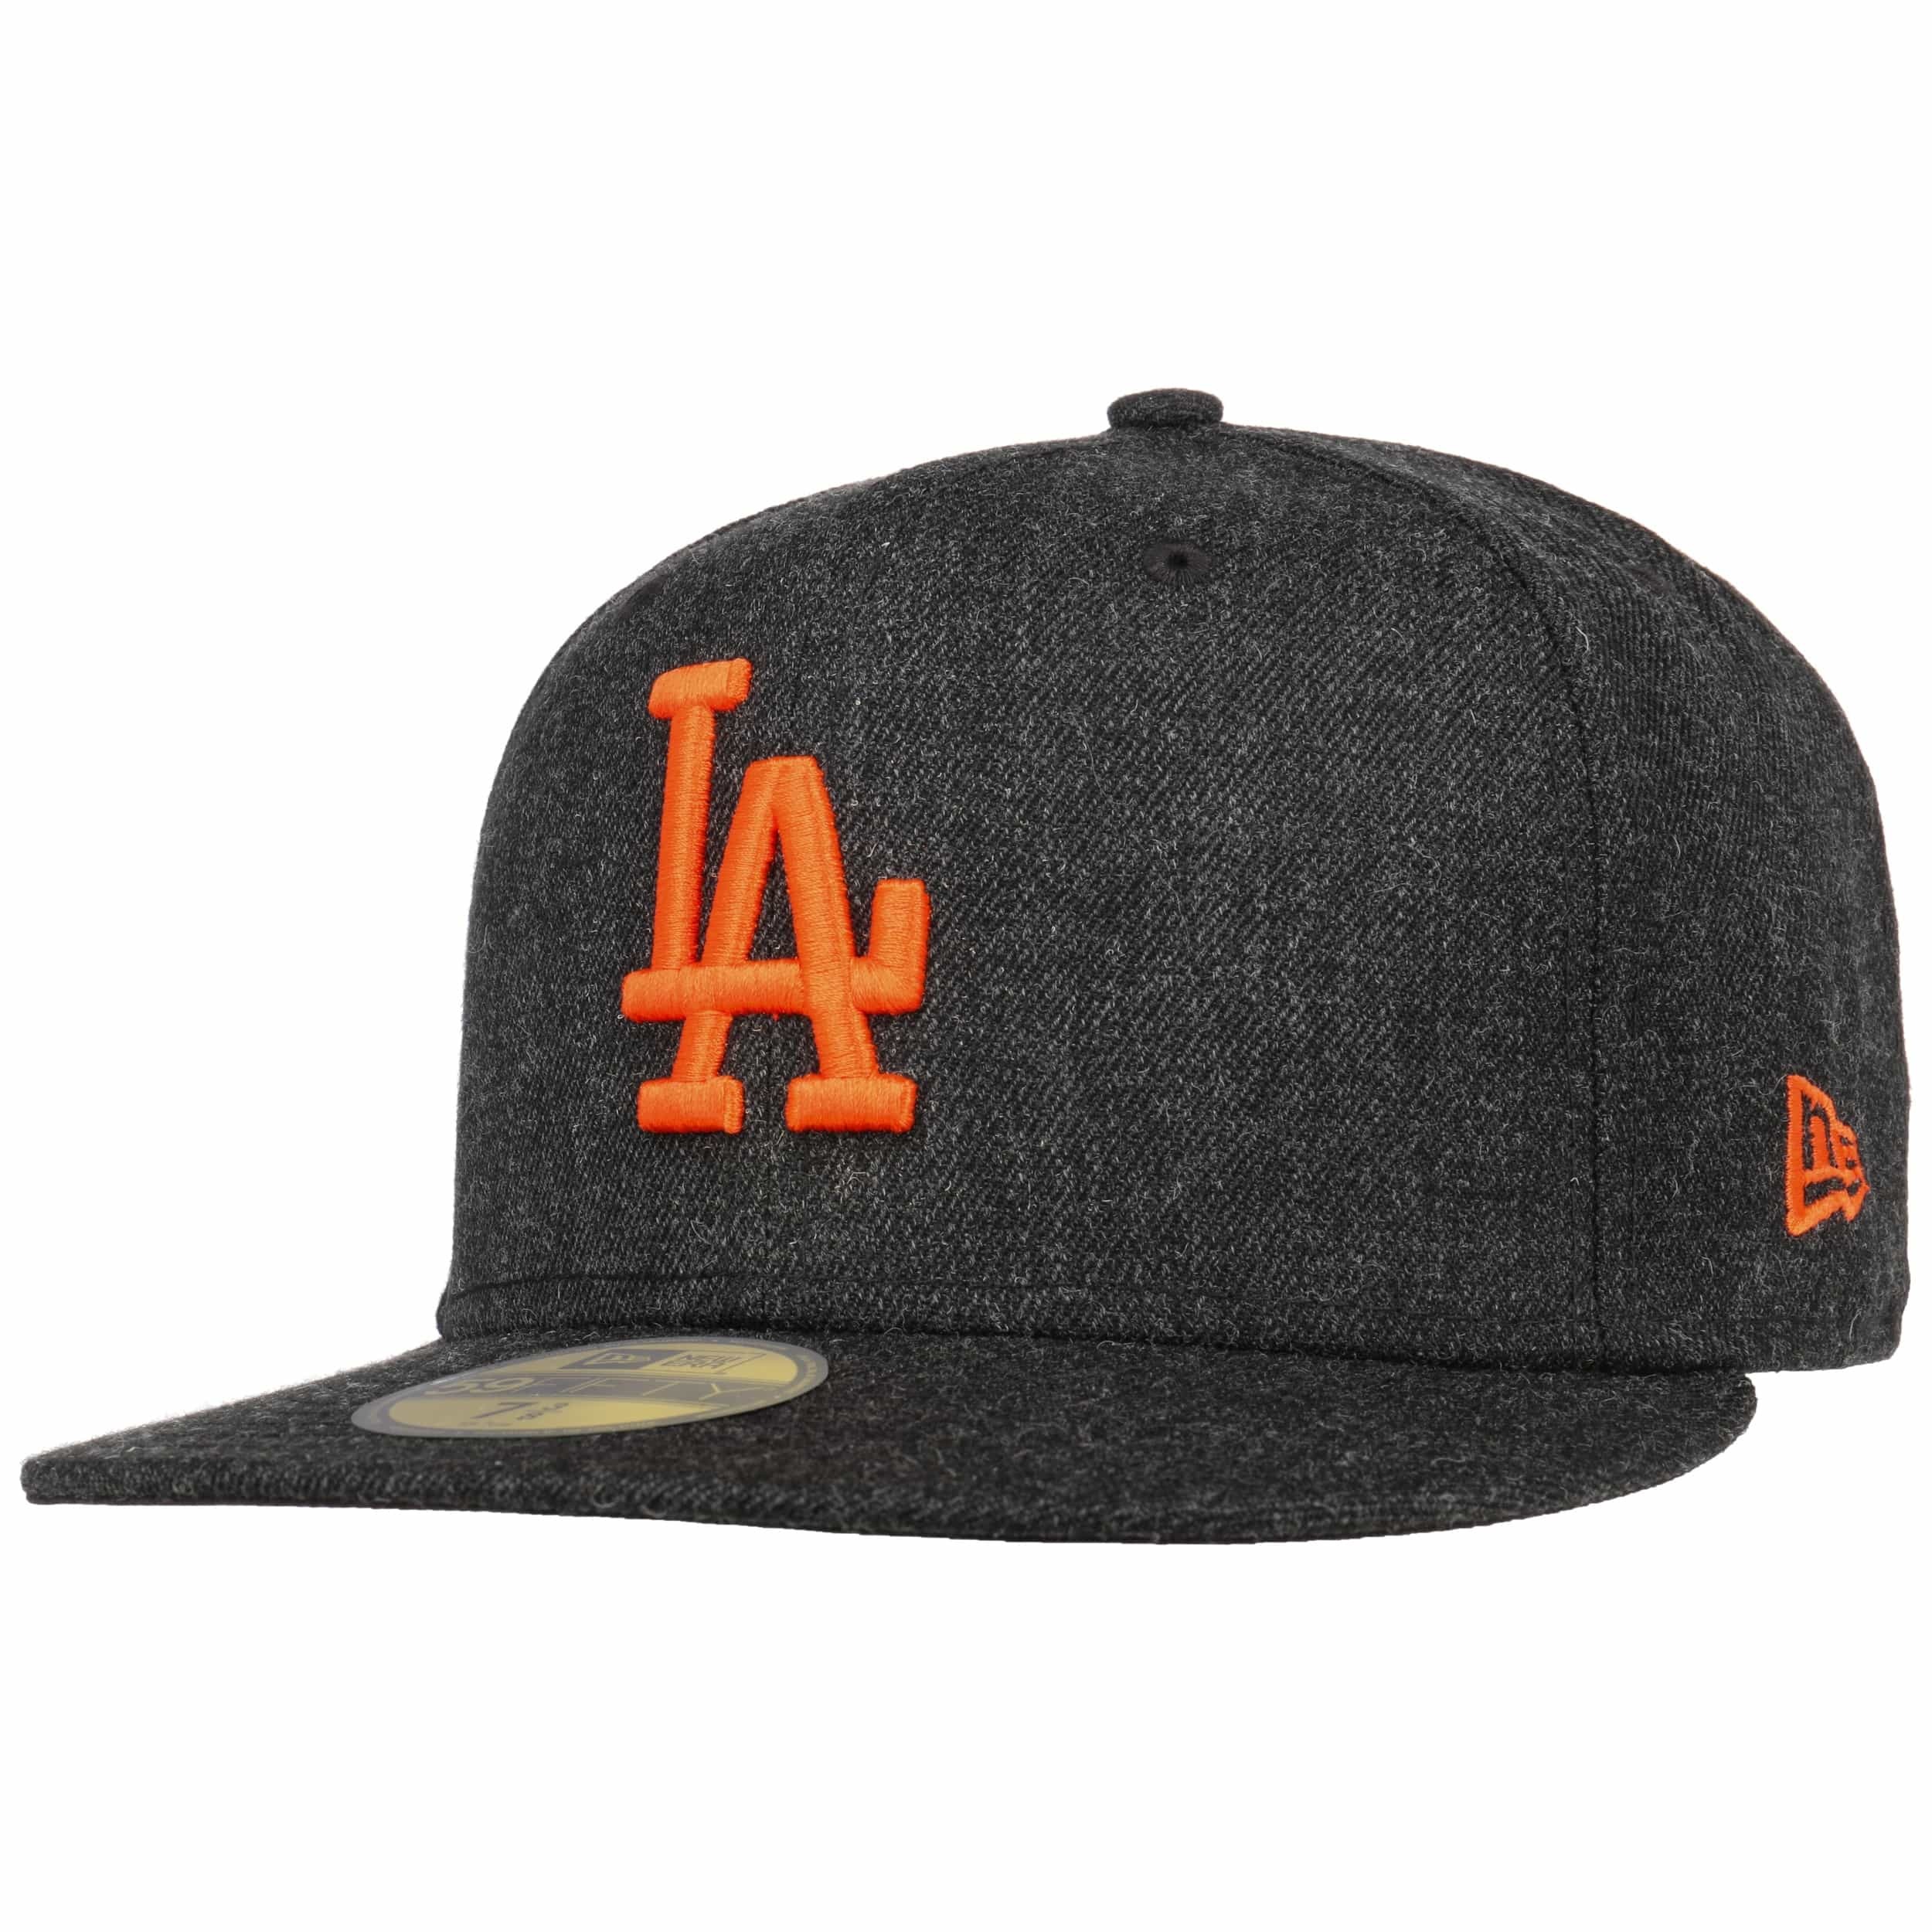 LA Dodgers USA New Era 59Fifty Official On Field Cool Base Fitted